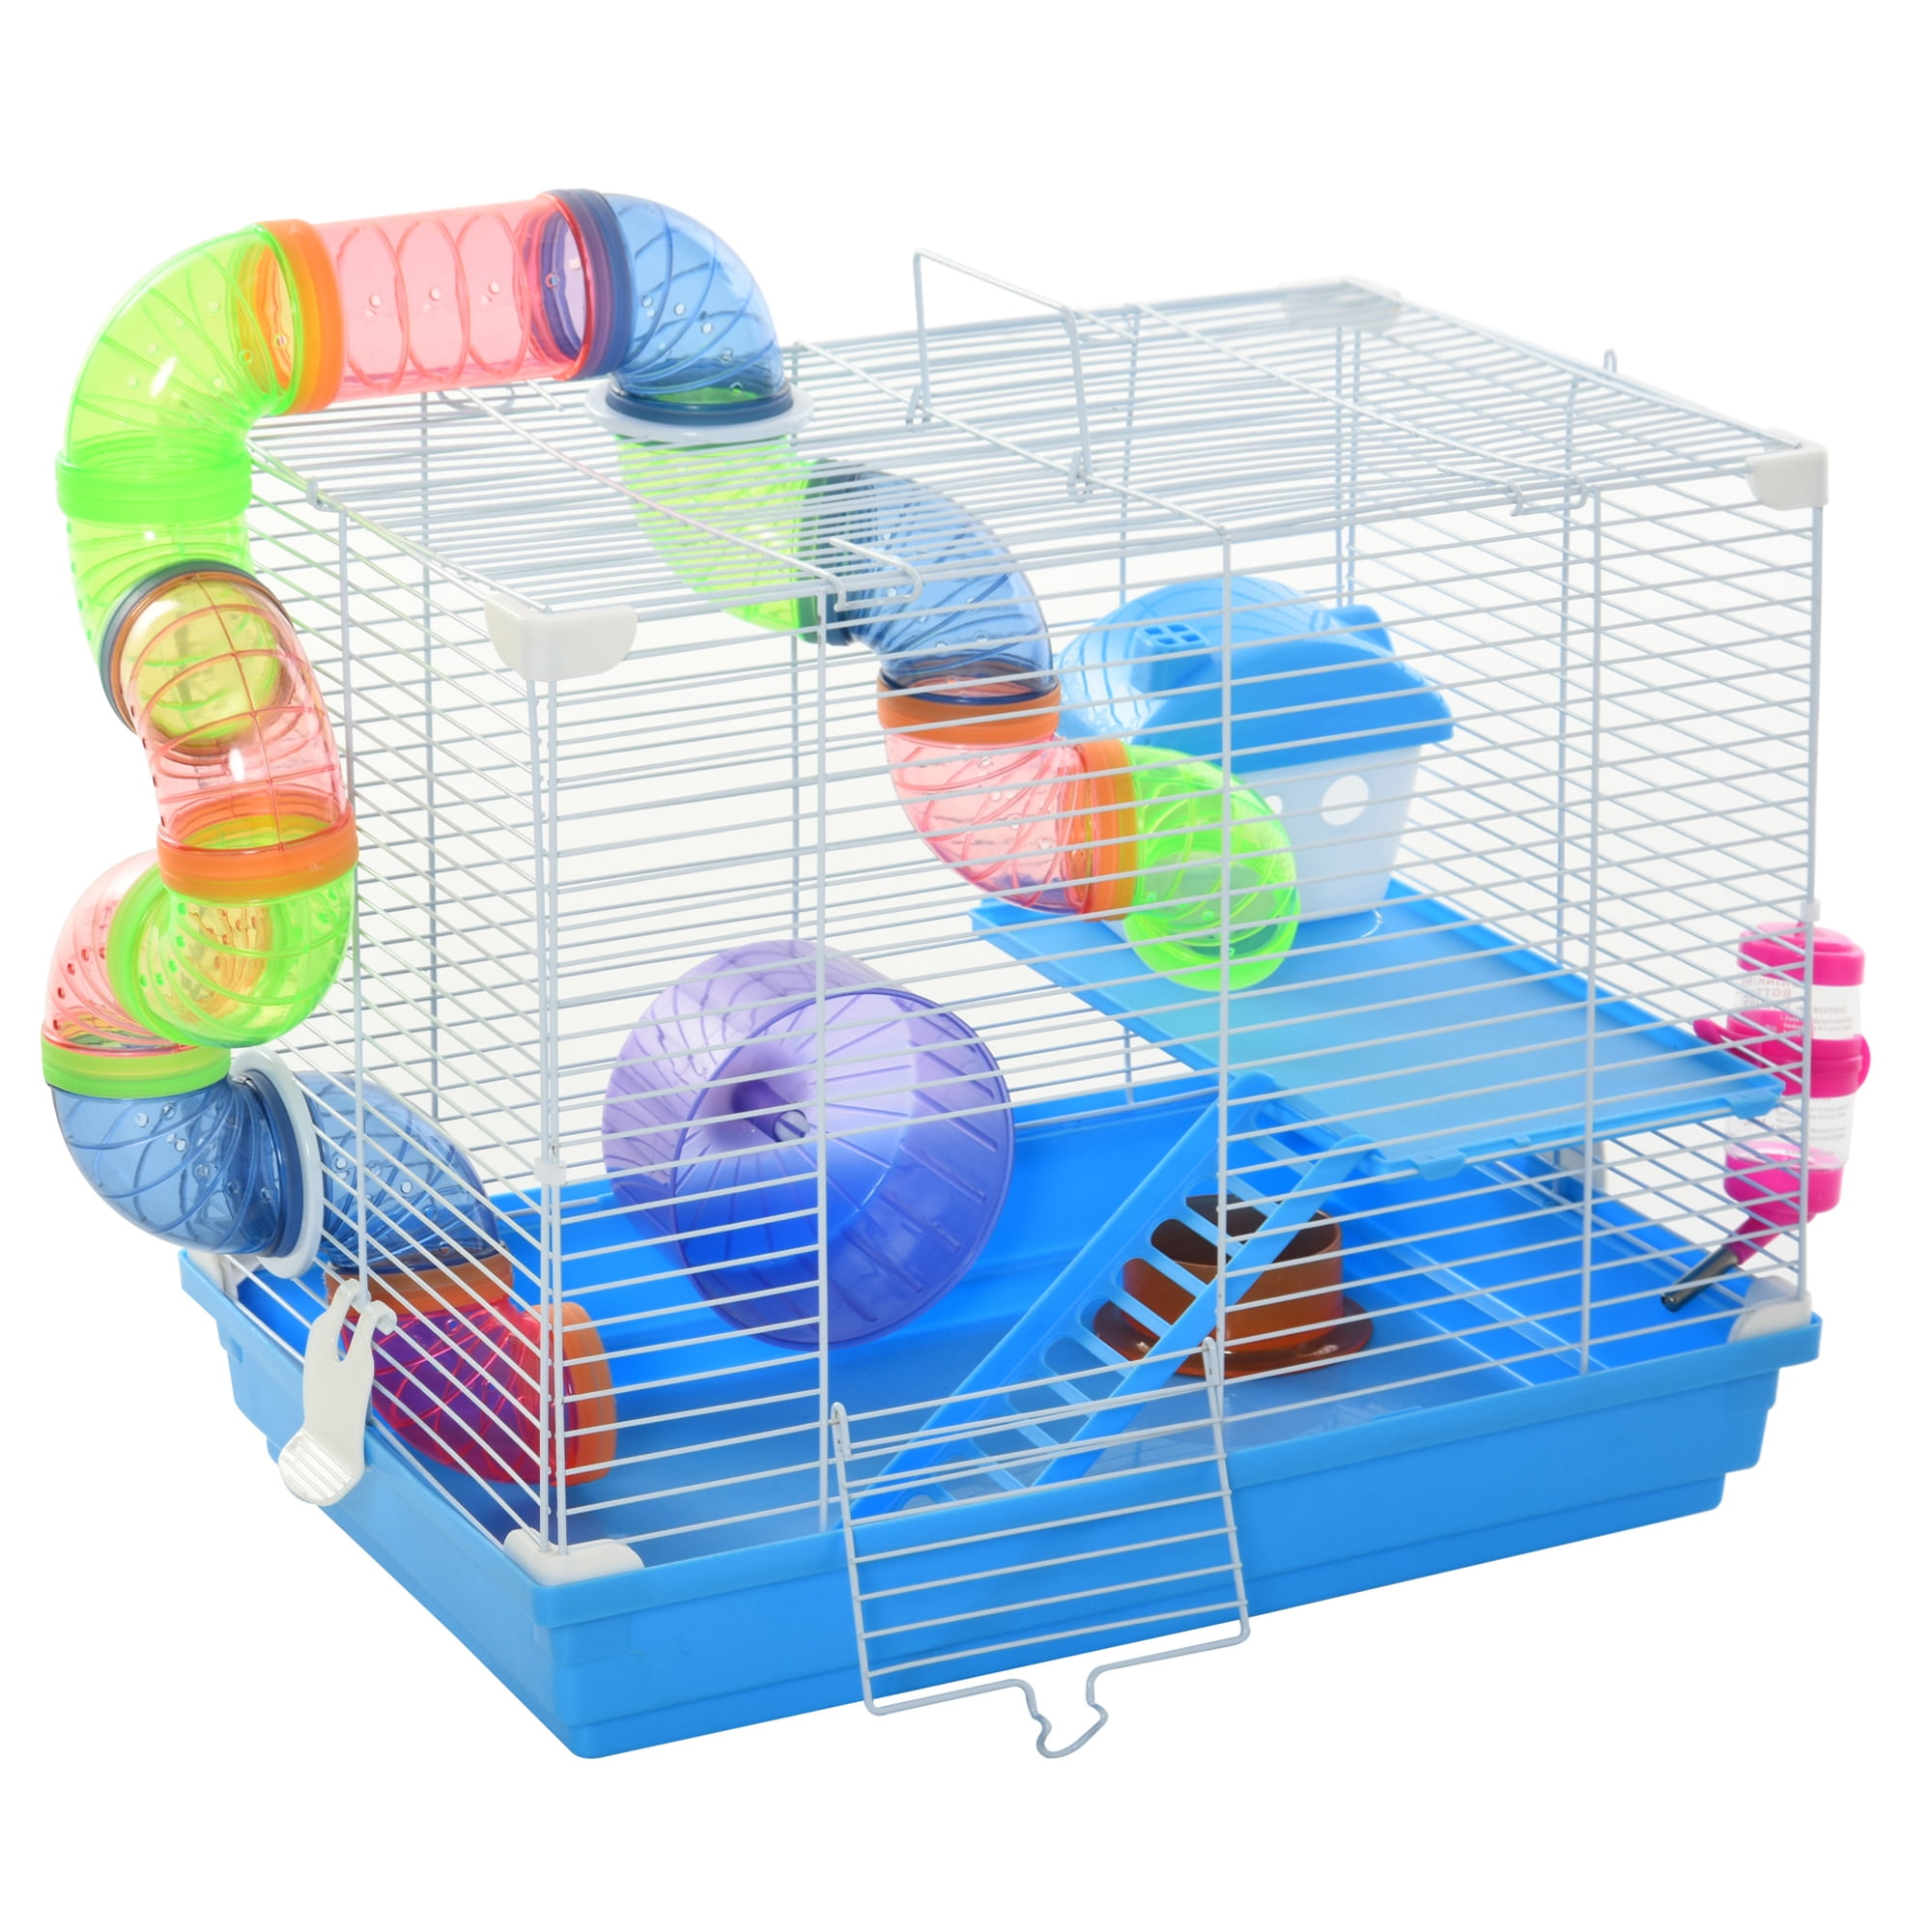 2-Tier Hamster Cages and Habitats Small Mouse Villa House Include Living Area and Playing Area with Accessories for Dwarf Hamster Mice Home 